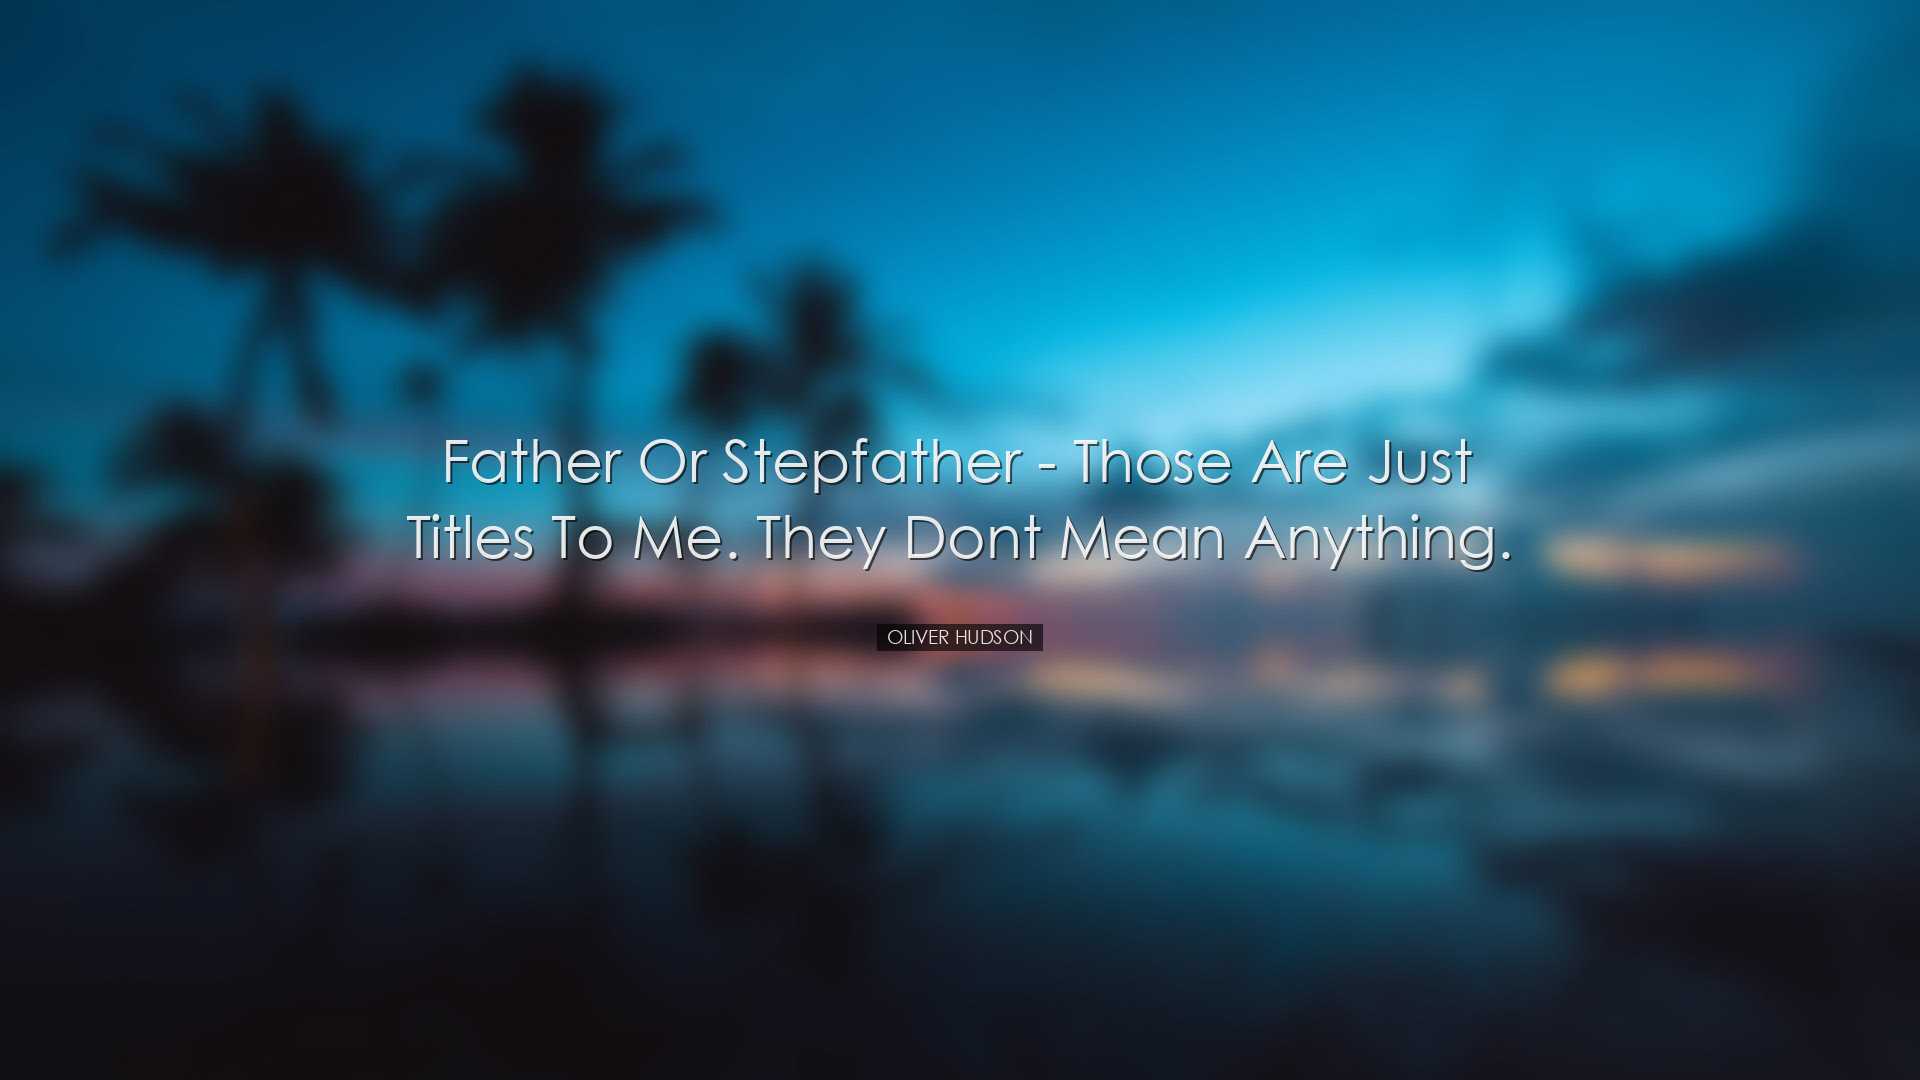 Father or stepfather - those are just titles to me. They dont mean